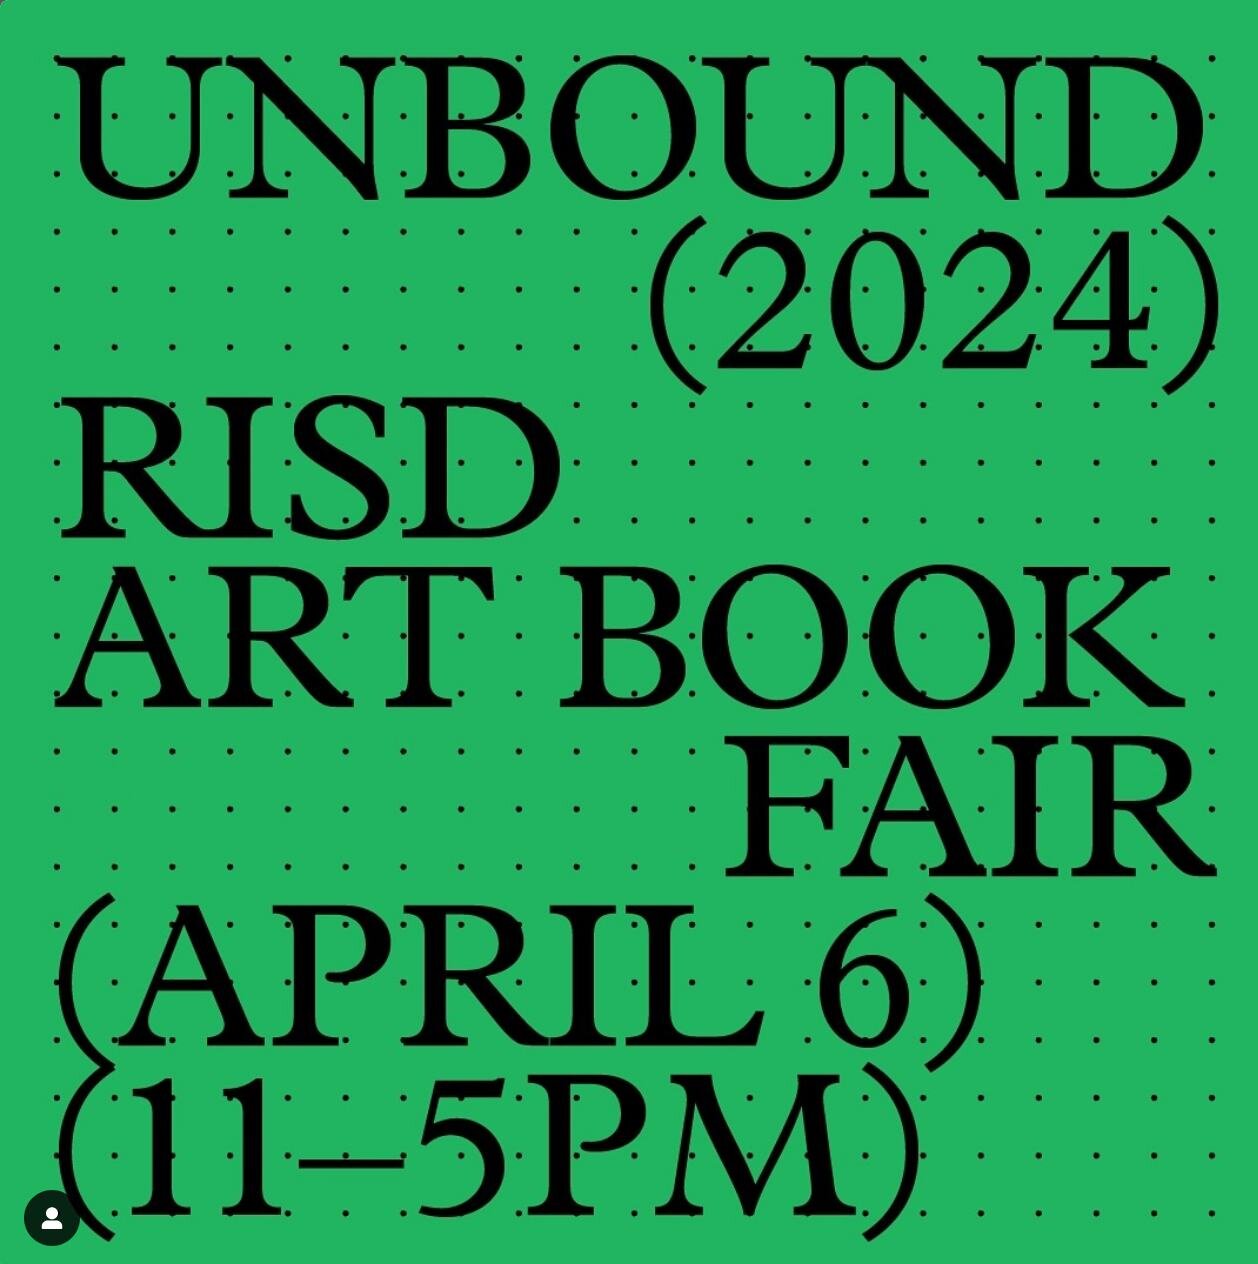 Spending my evening getting ready for my first Rhode Island tabling event tomorrow at RISD Unbound! I'll be woman-ing the SAW table with the help of @cityfirefly2020, come say hi if you're there 🙌🙌🙌 #risdunbound2024 #selfpublishing @comicsworkshop